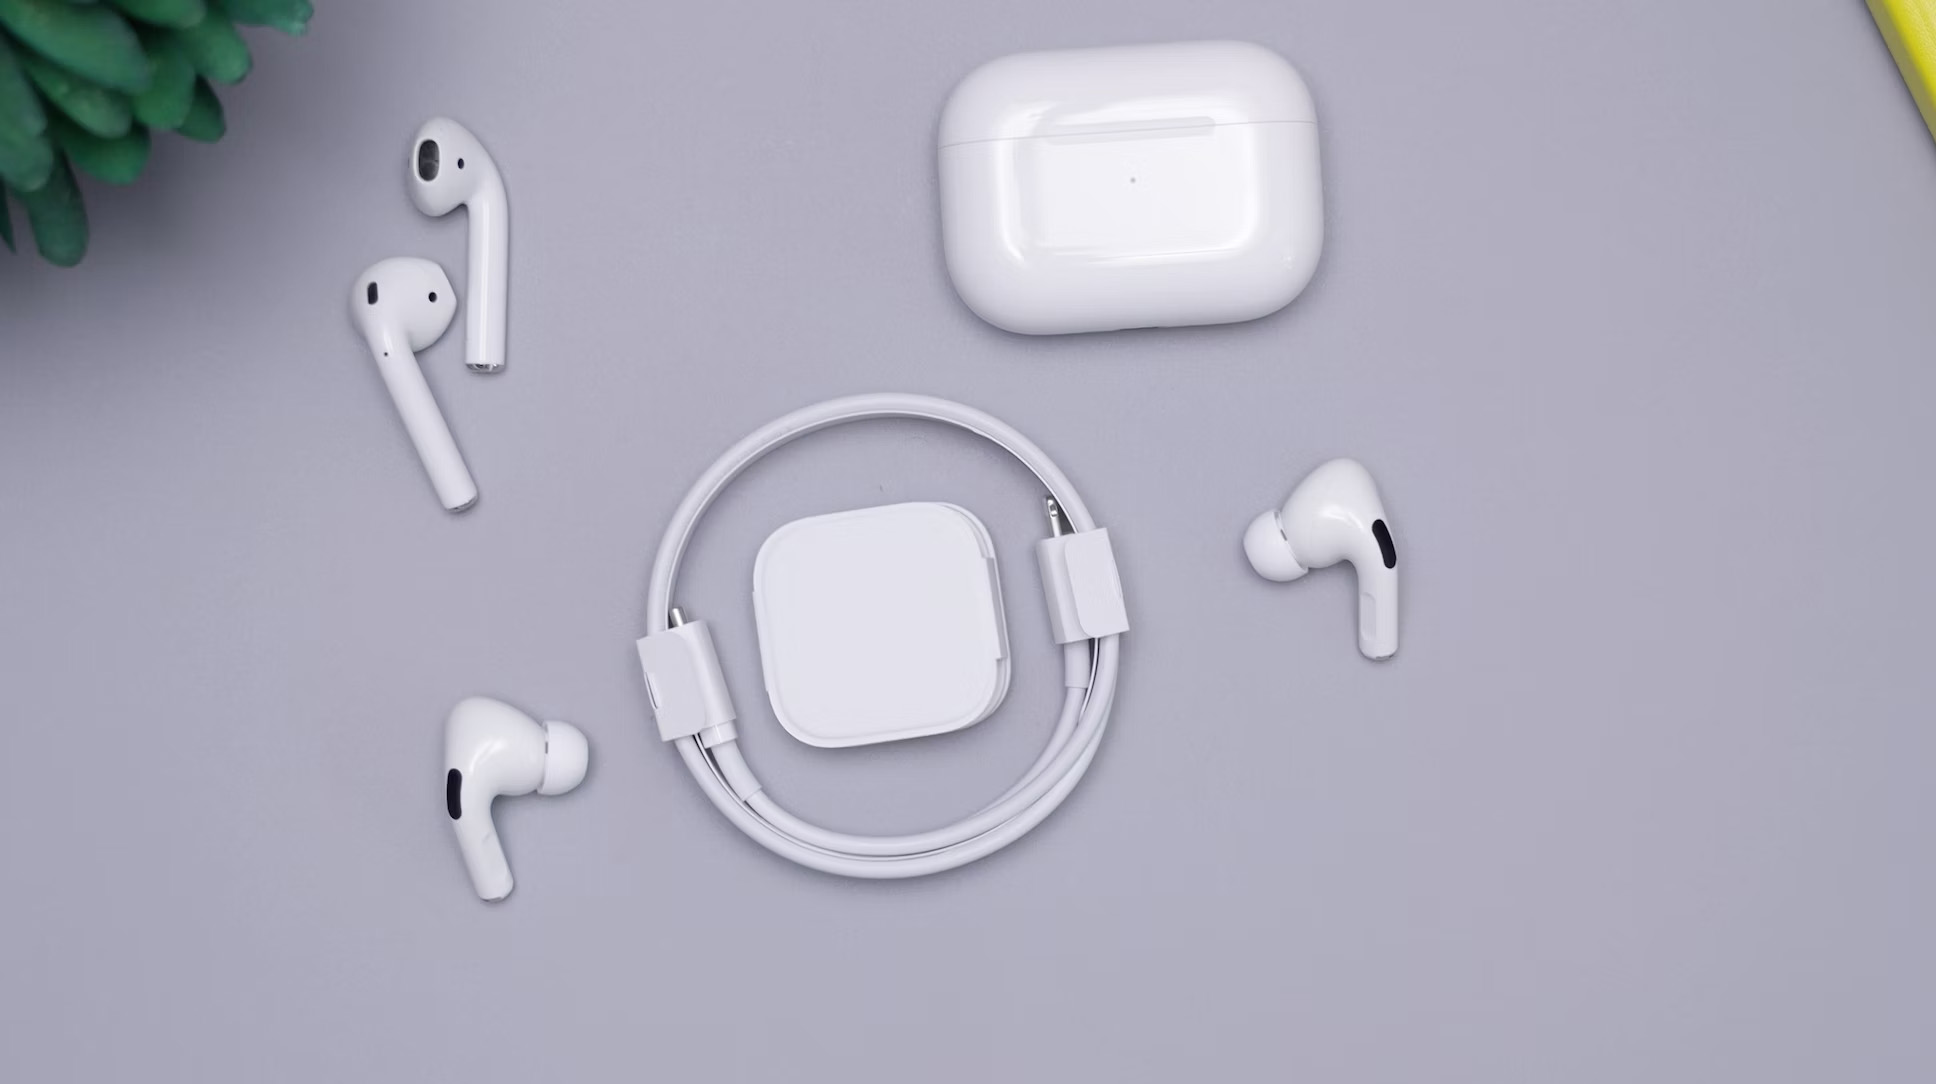 Some earbuds and headphones